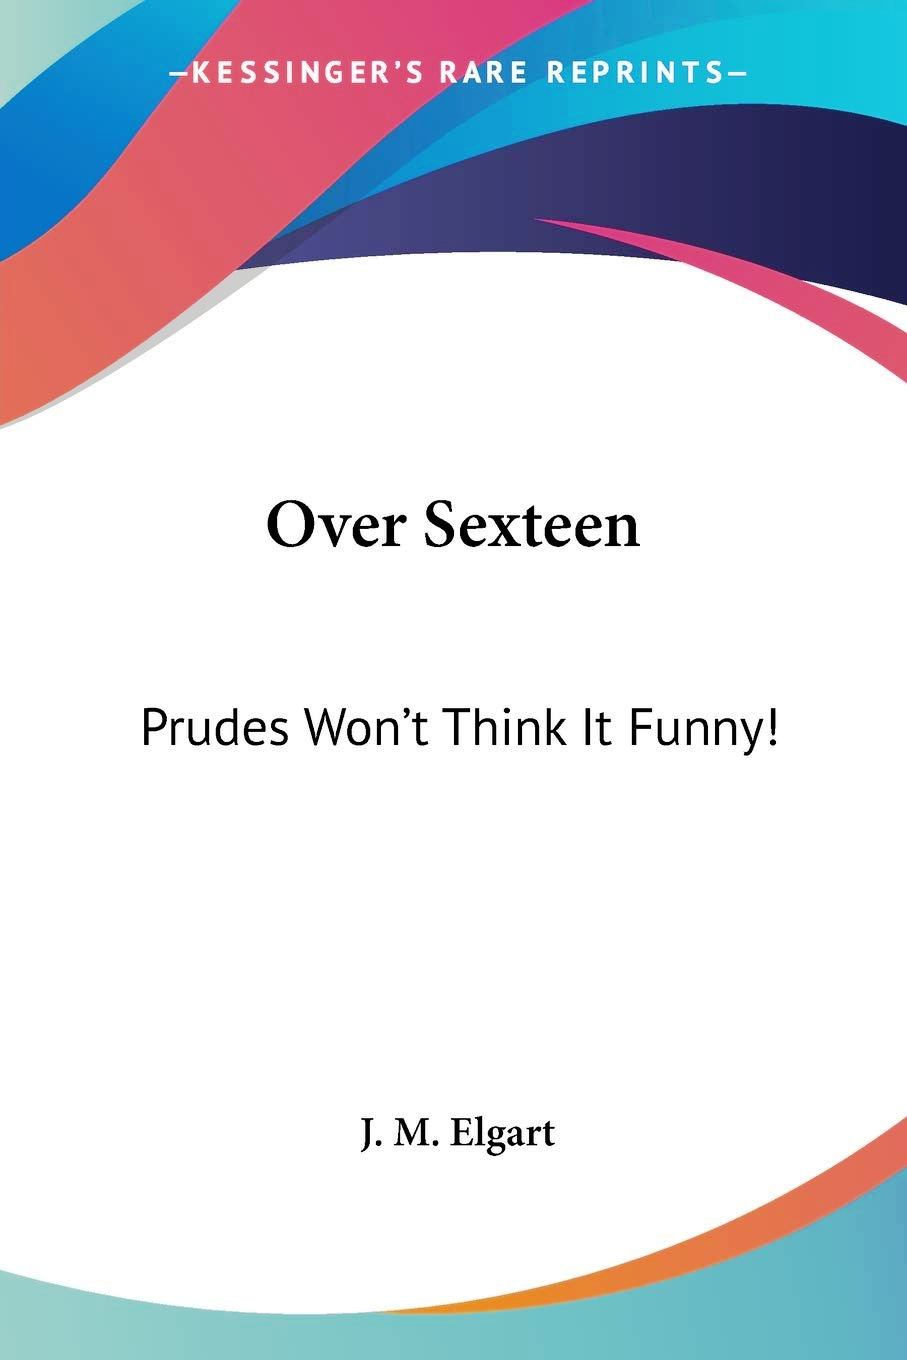 Over Sexteen (Prudes Won't Think It Funny)